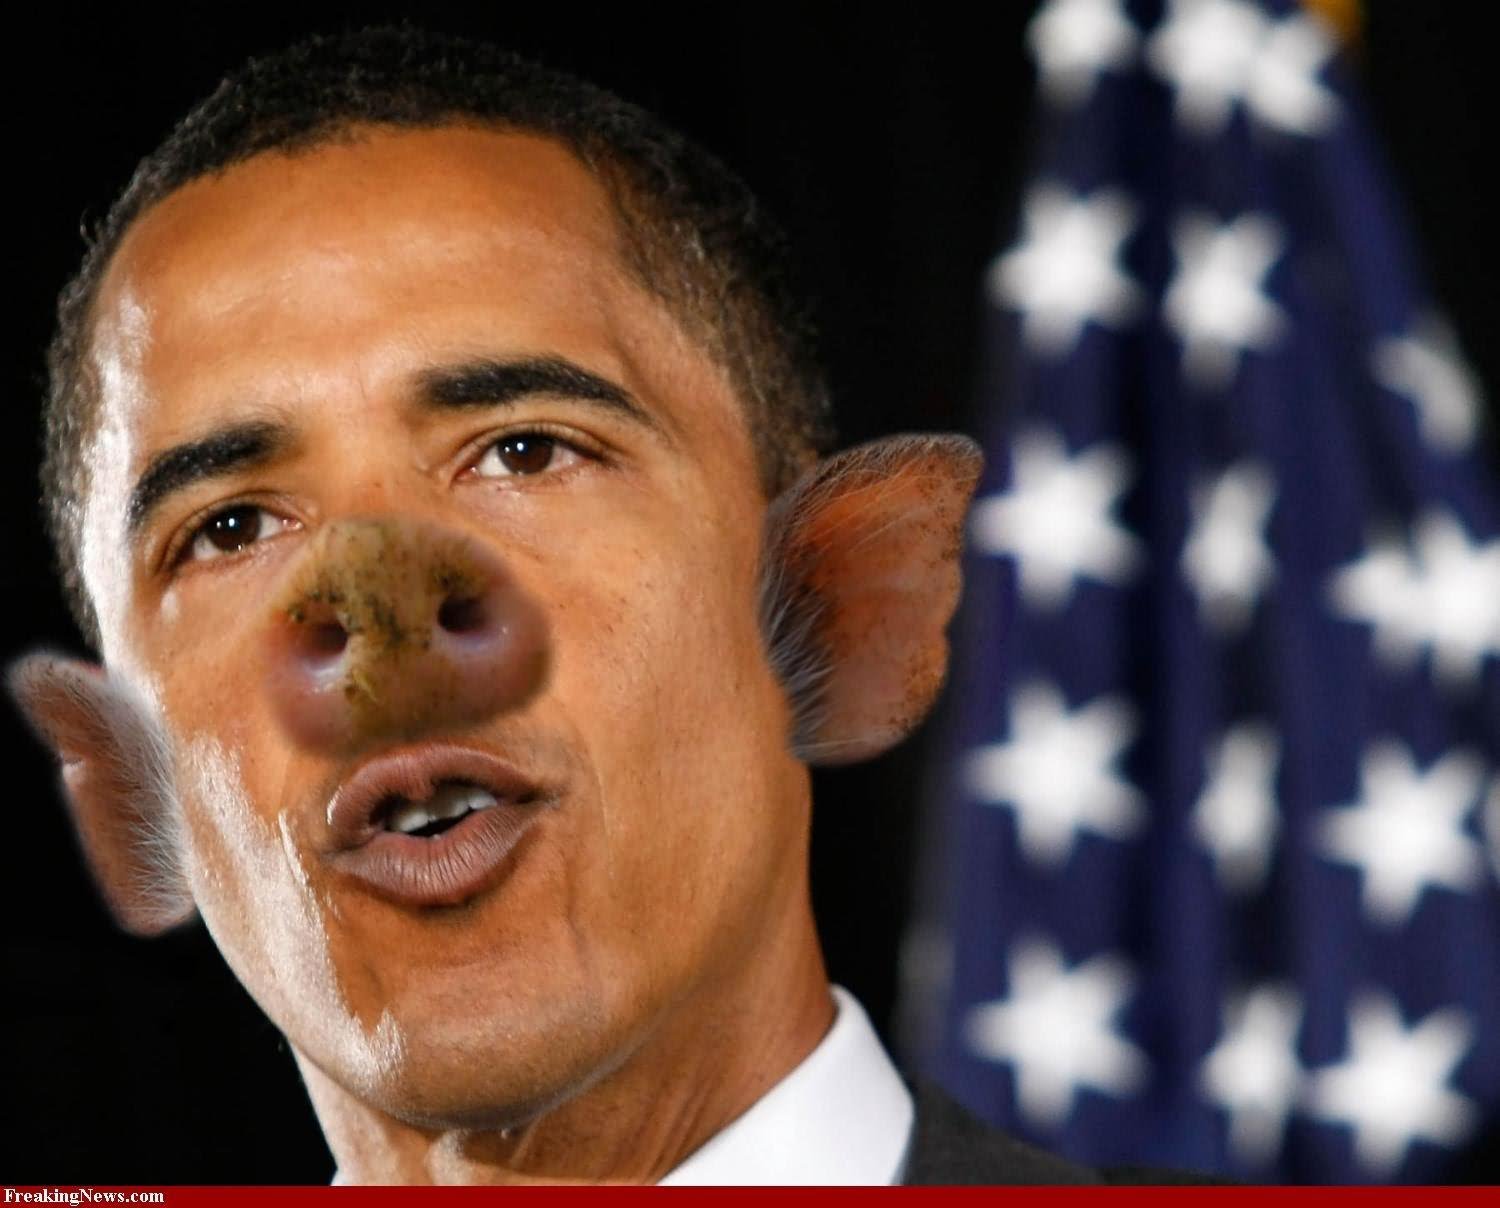 Obama With Pig Face Funny Image